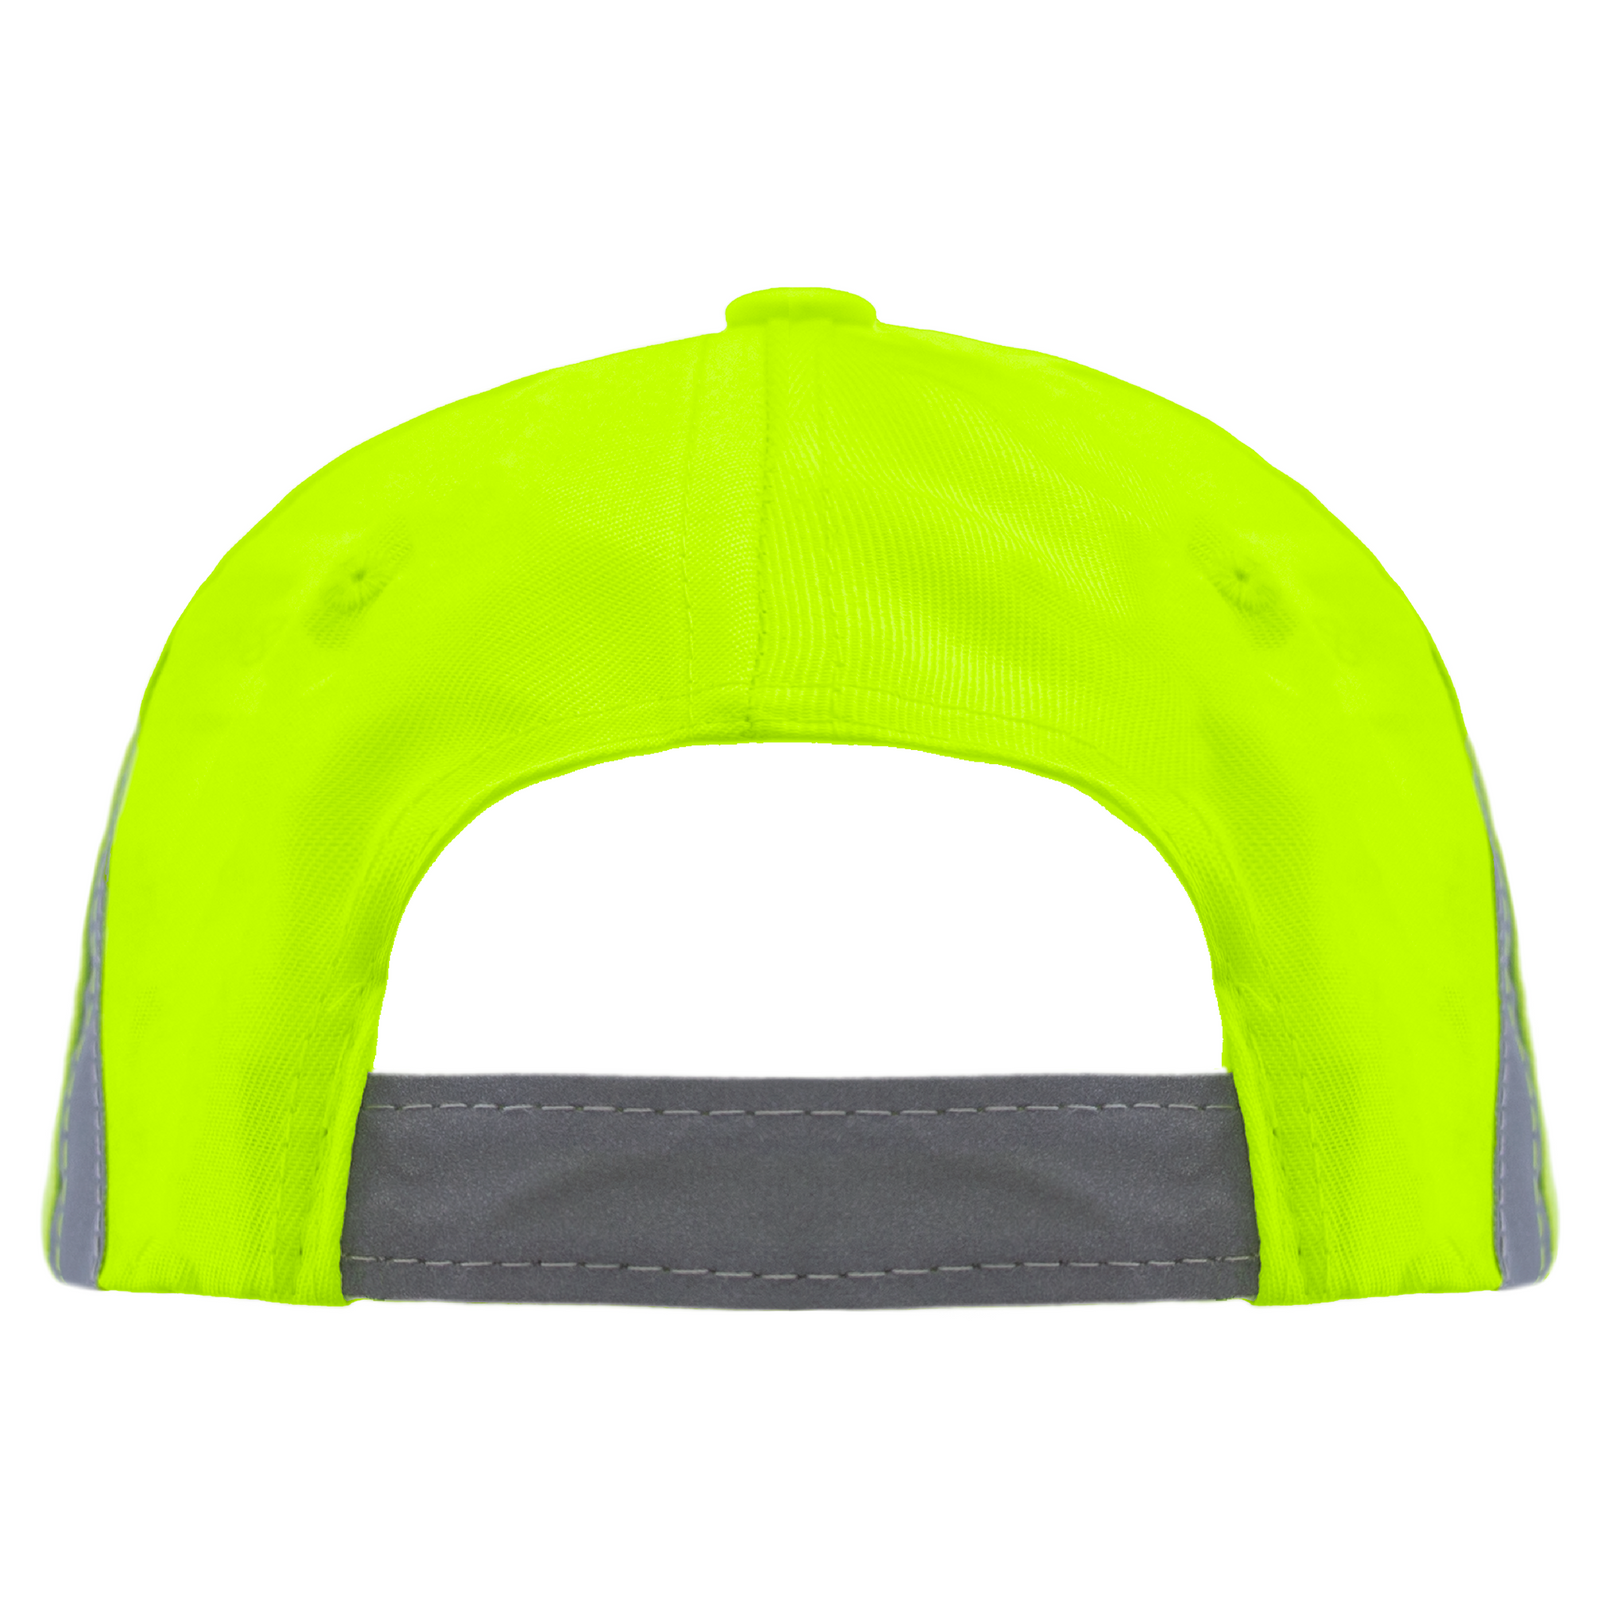 Back view of the Hi-vis lime JORESTECH safety cap with reflective stripes over white background